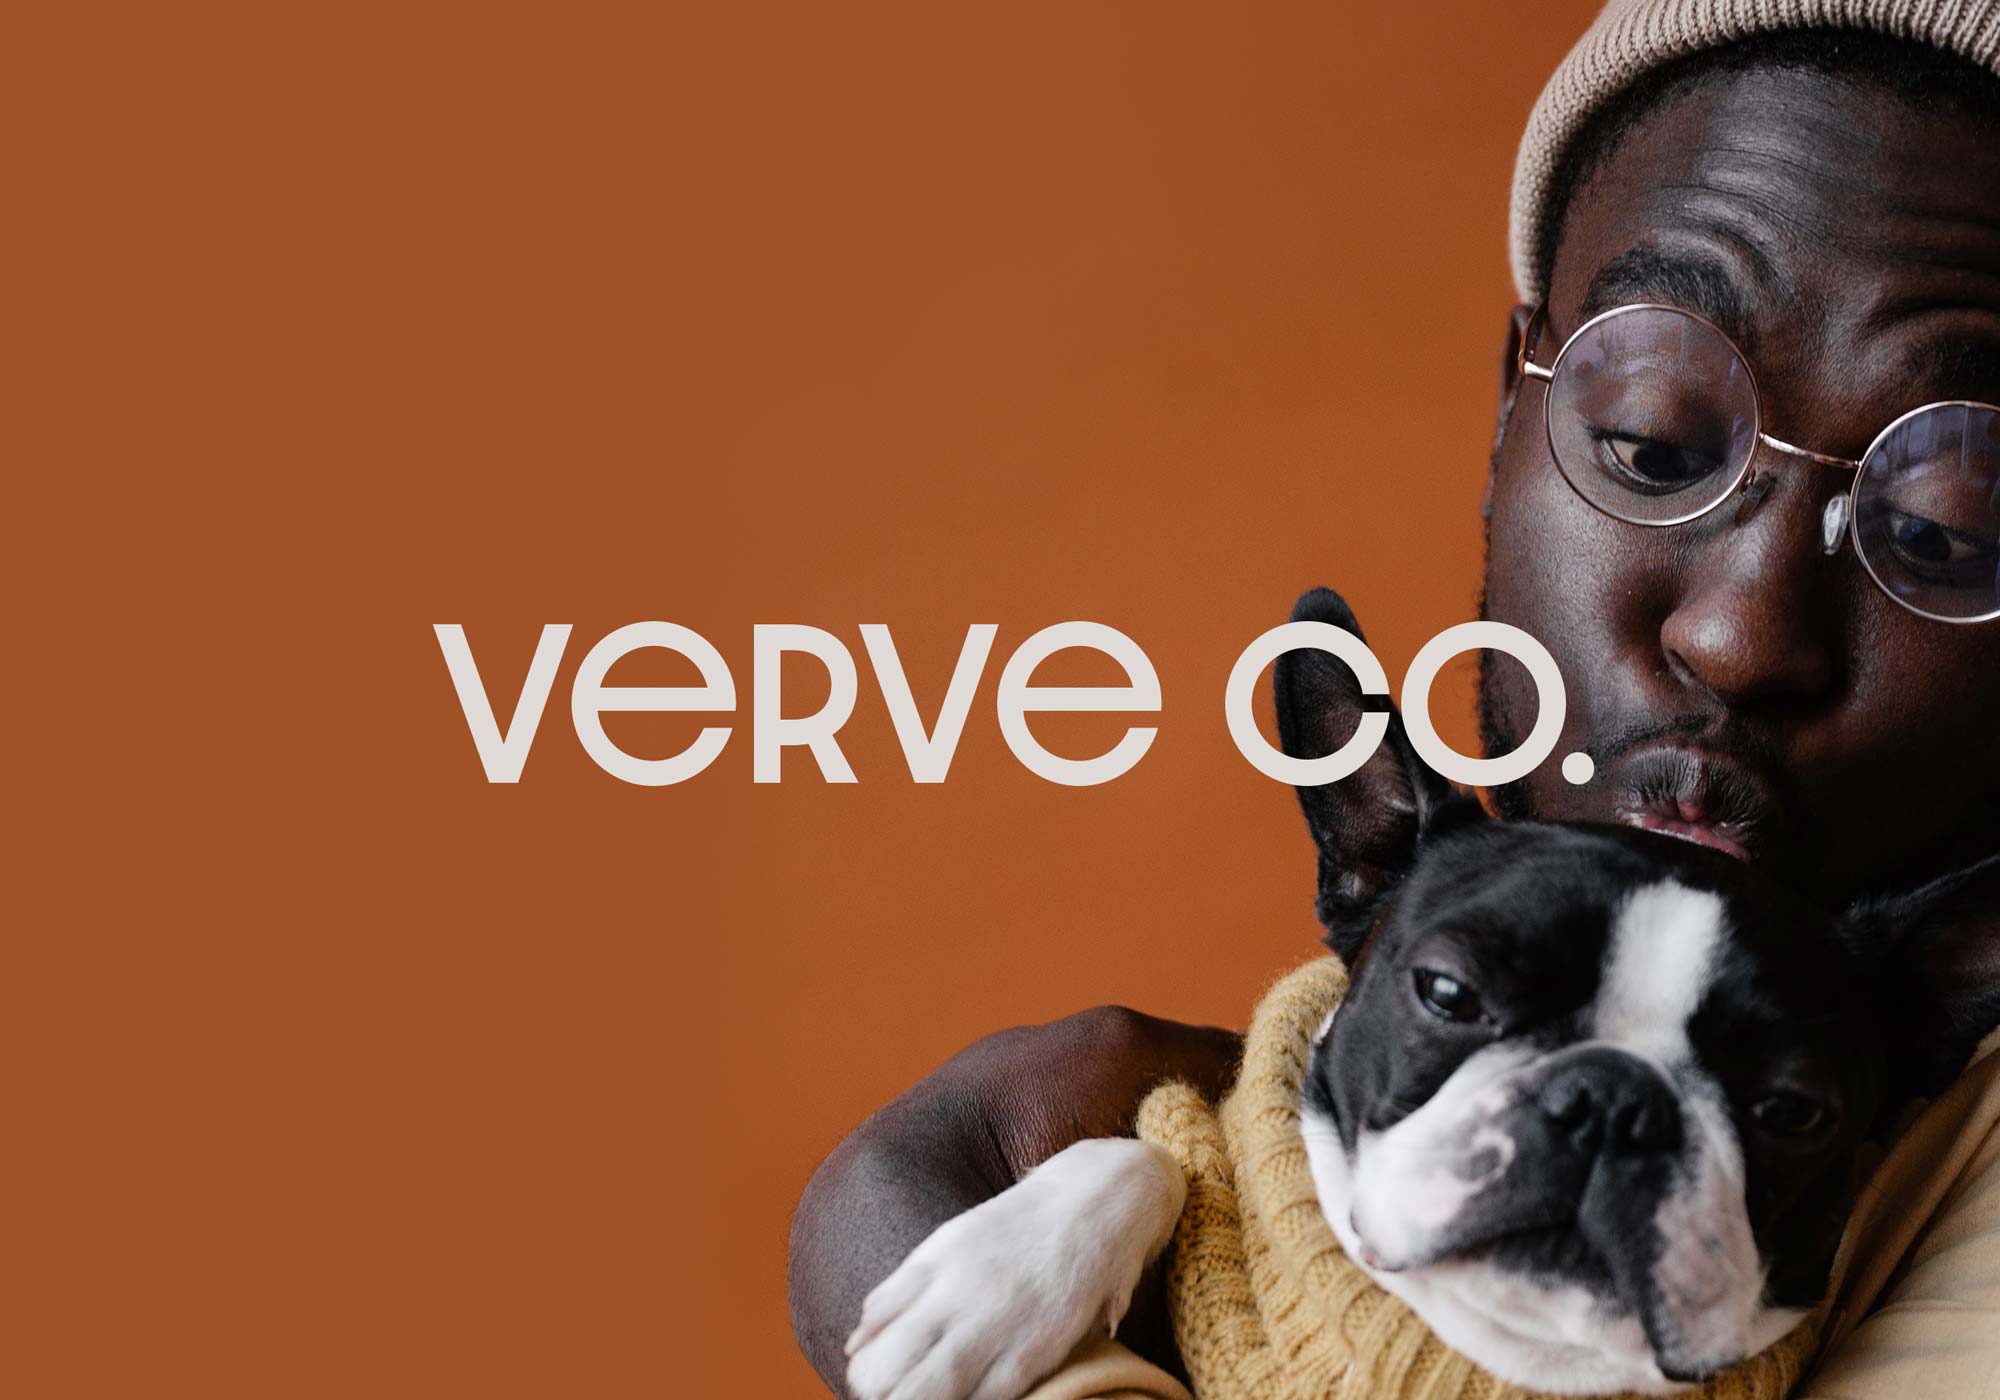 Verve Co by The Brand Bazaar